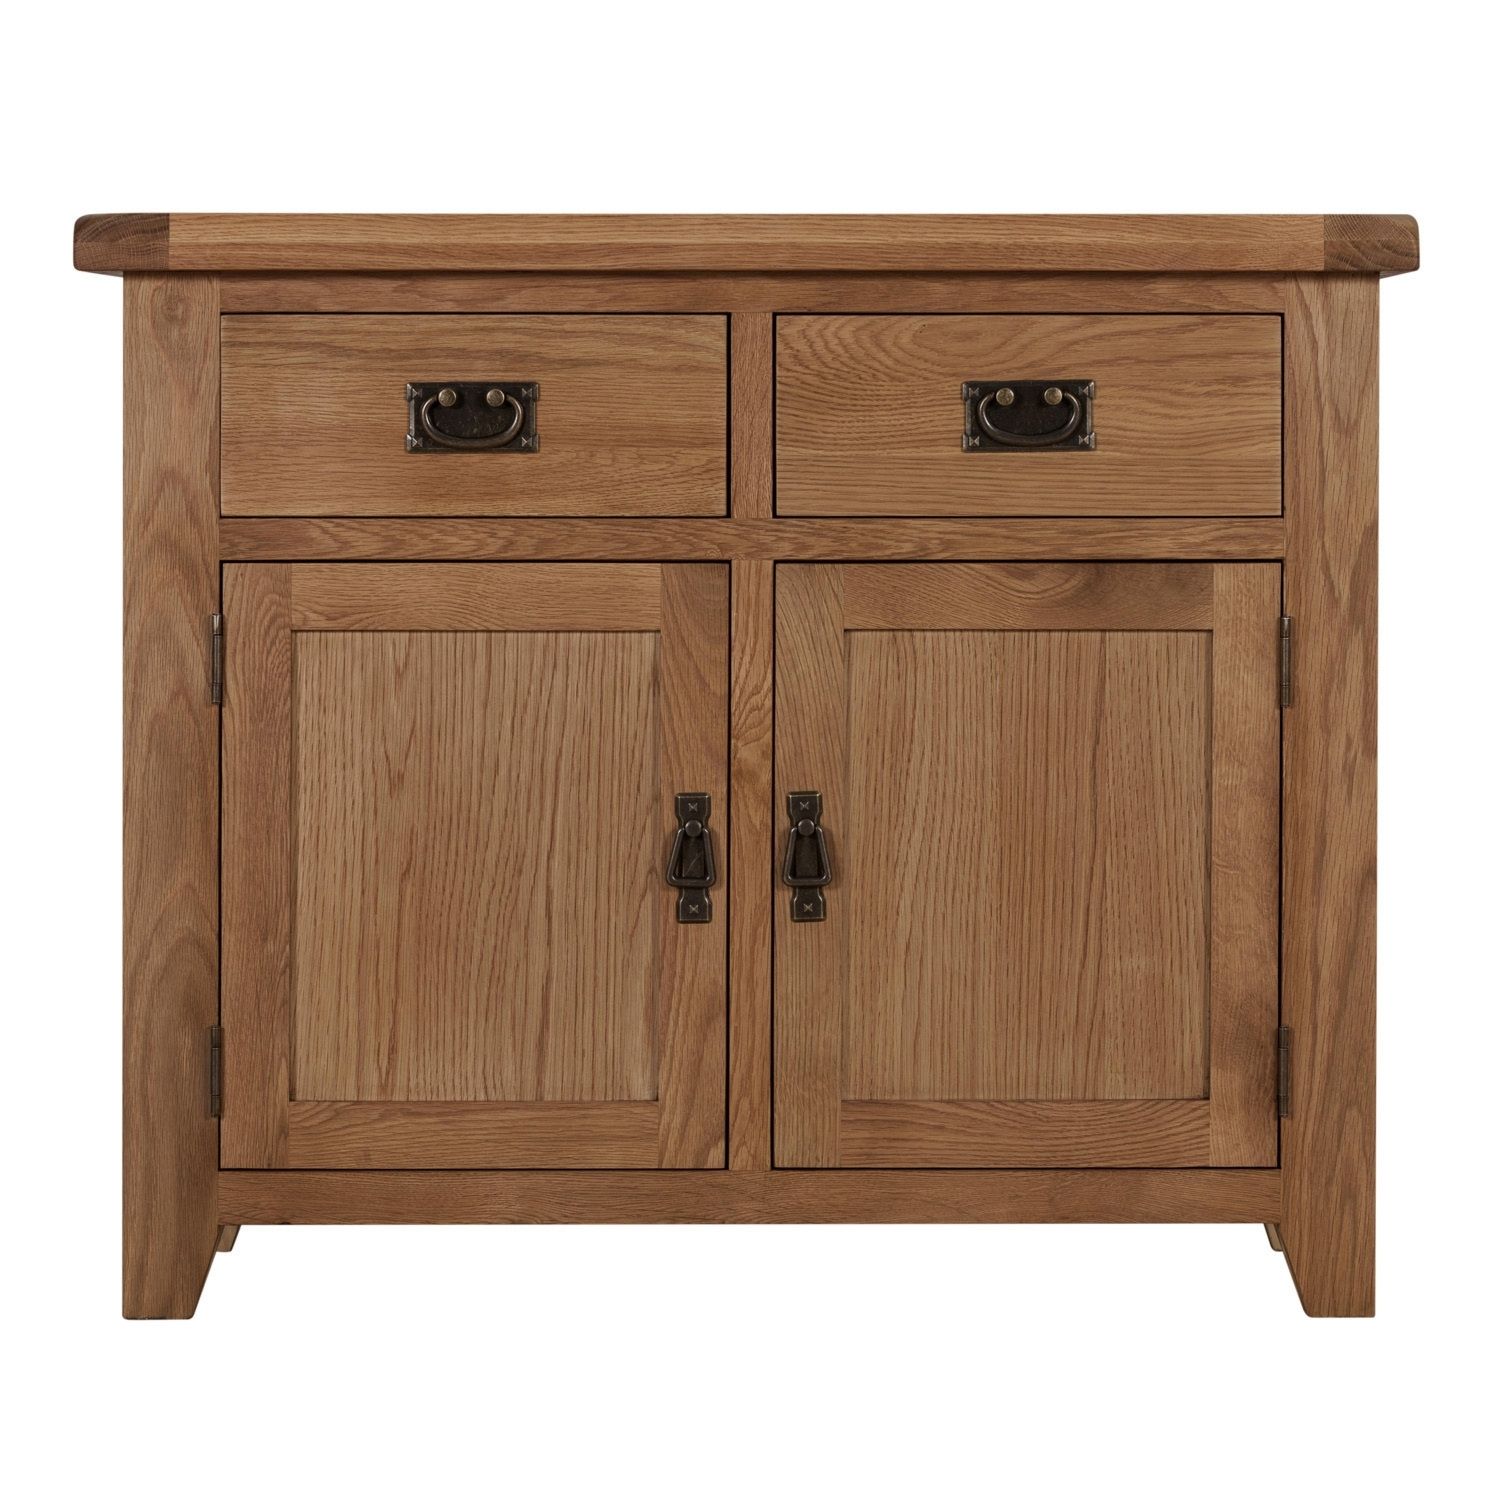 Kinsale Two Door Two Drawer Sideboard For Most Up To Date Vintage Finish 4 Door Sideboards (View 18 of 20)